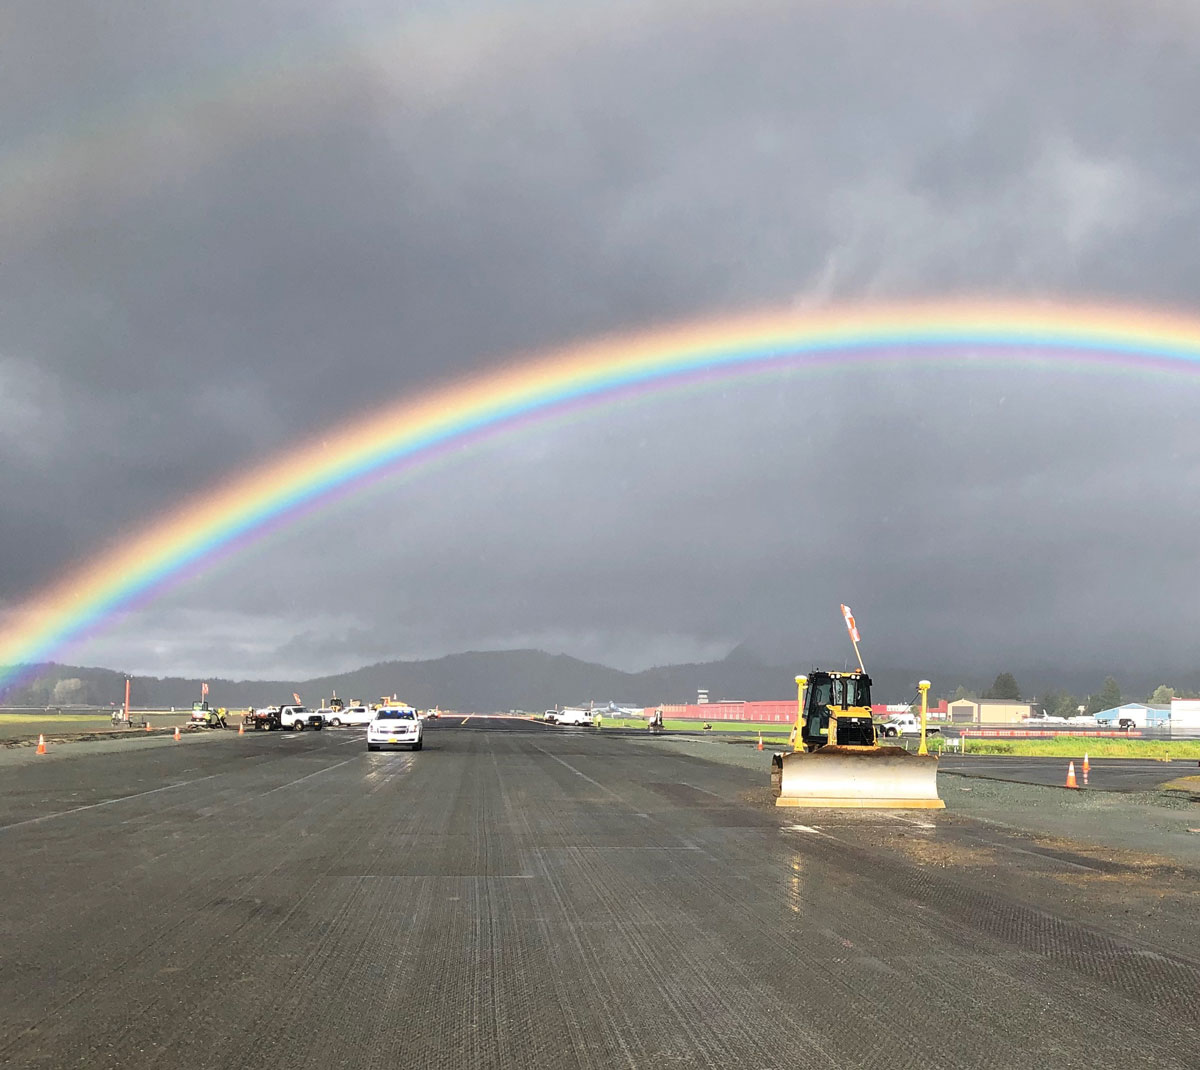 Meeting the Challenge of a Job — Over $15,000,000 Transportation, Marine, Heavy, Earthmoving; Contractor: Colaska dba SECON; Project: Juneau International Airport - Taxiway A Rehabilitation, Taxiway D-1 Relocation, & Taxiway E Realignment